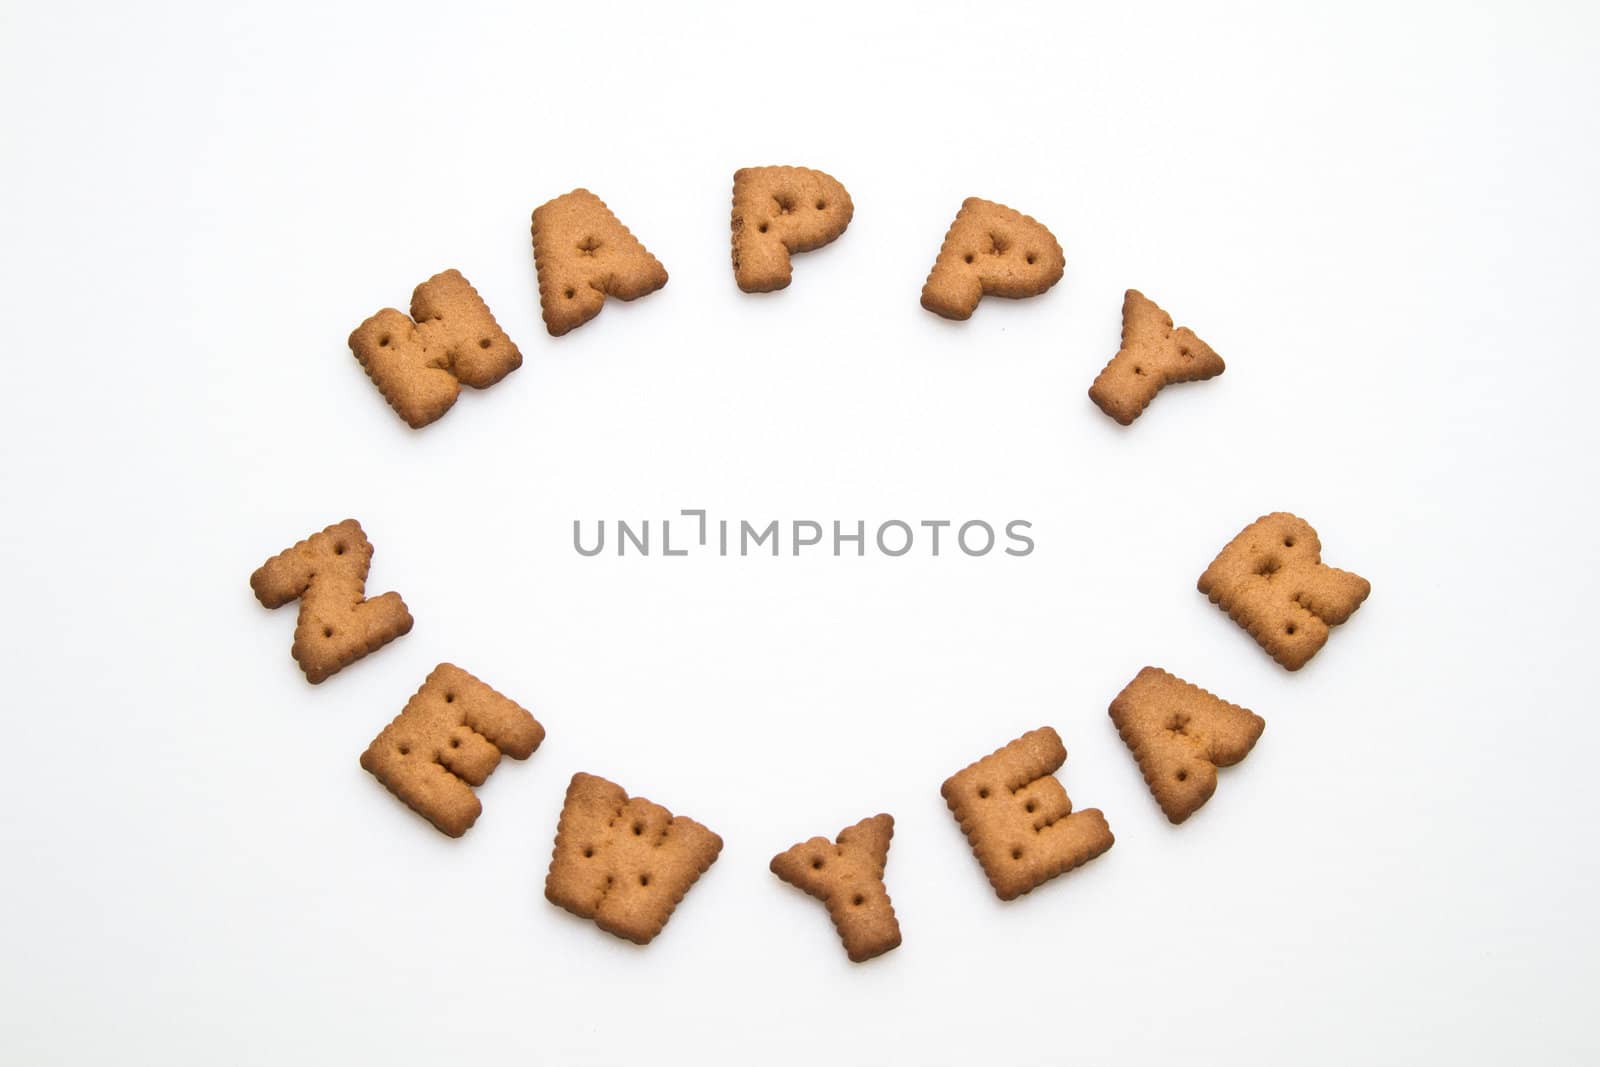 Happy New Year greeting words made by brown biscuits in center of white surface in landscape orientation for background use